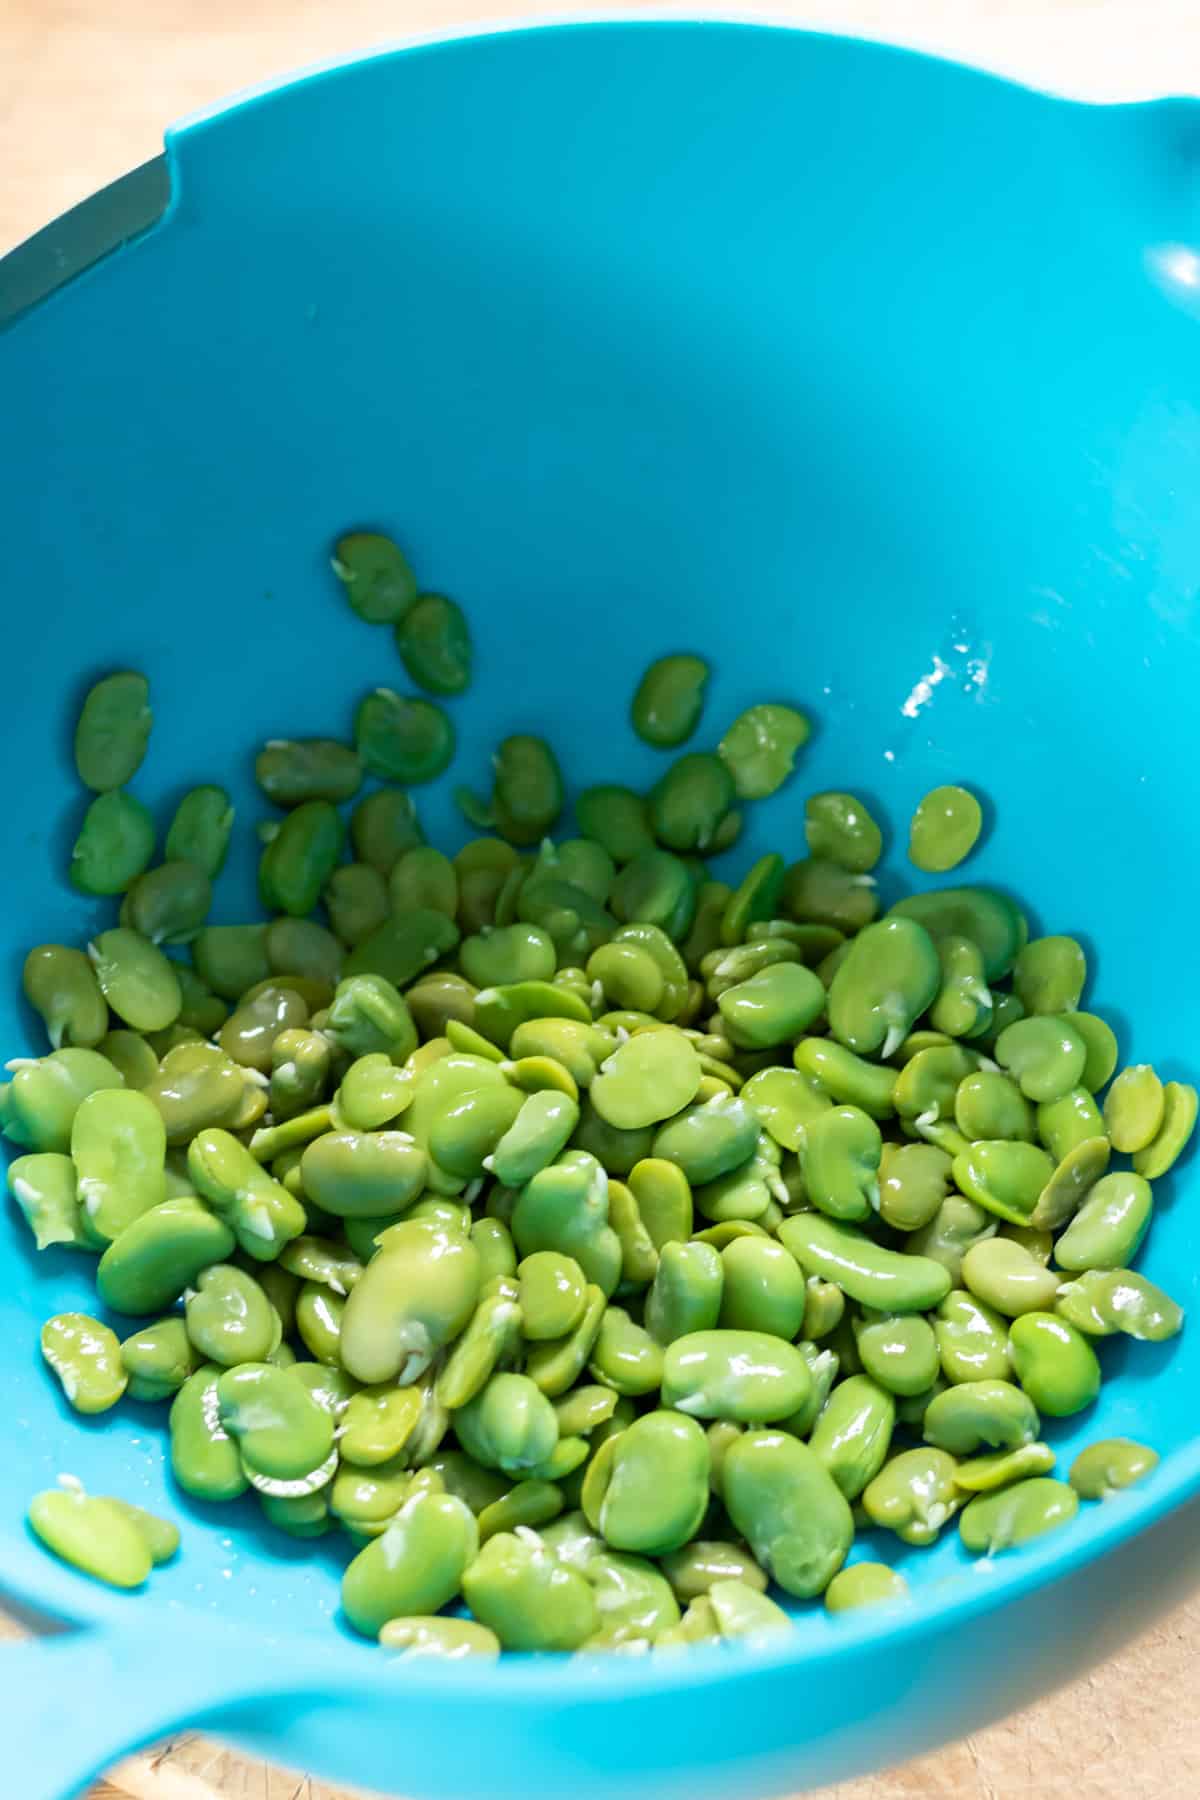 Bowl of shelled broad beans.